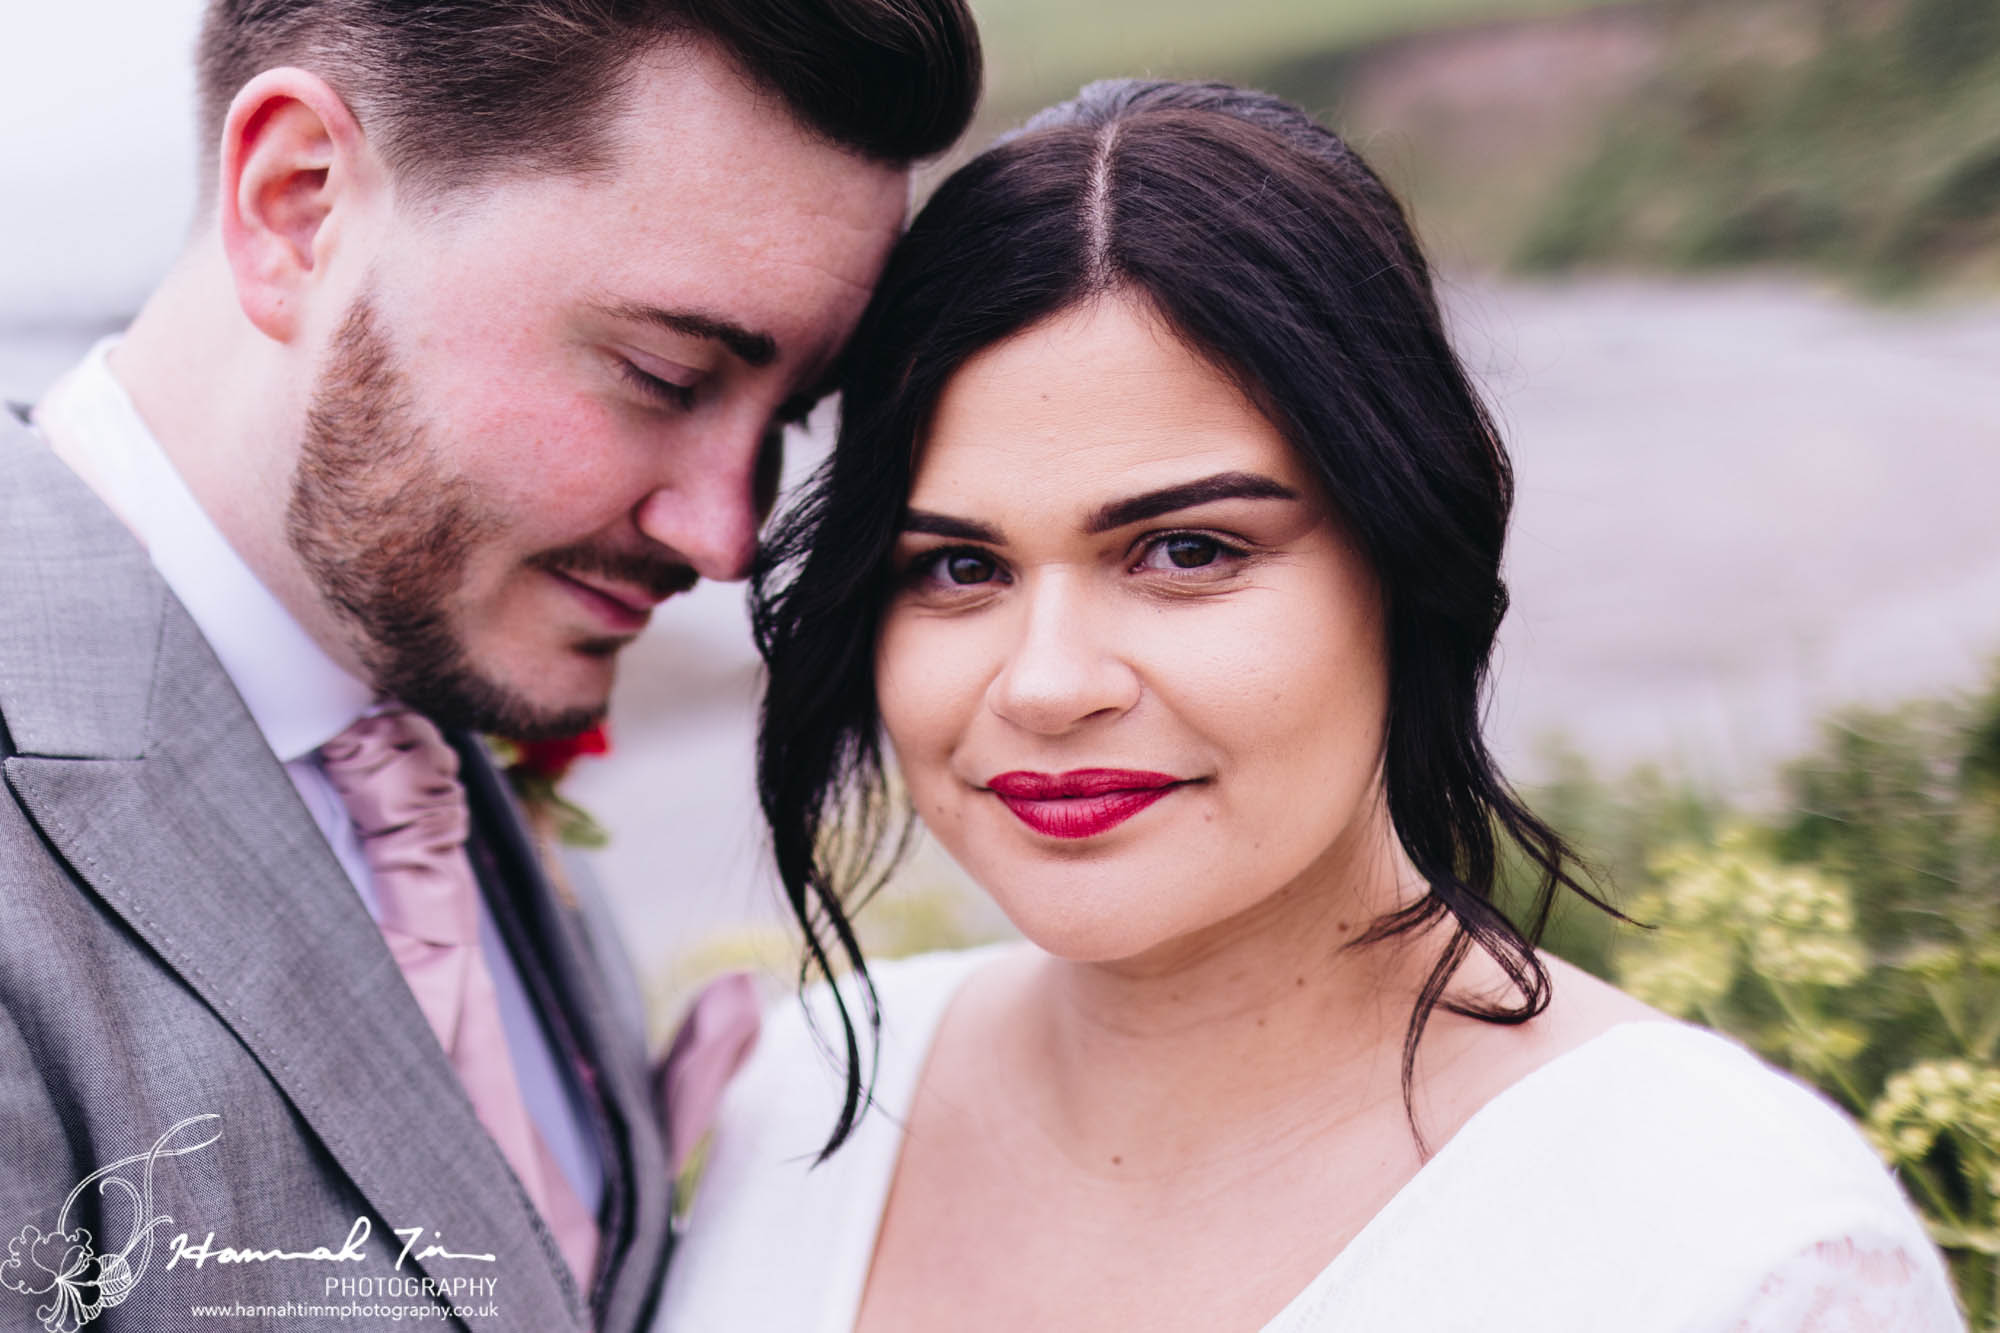 Elopment photography in Cornwall - a bride looks into the camera while her husband rests his head on hers. Close up wedding photography in Cornwall by Hannah Timm